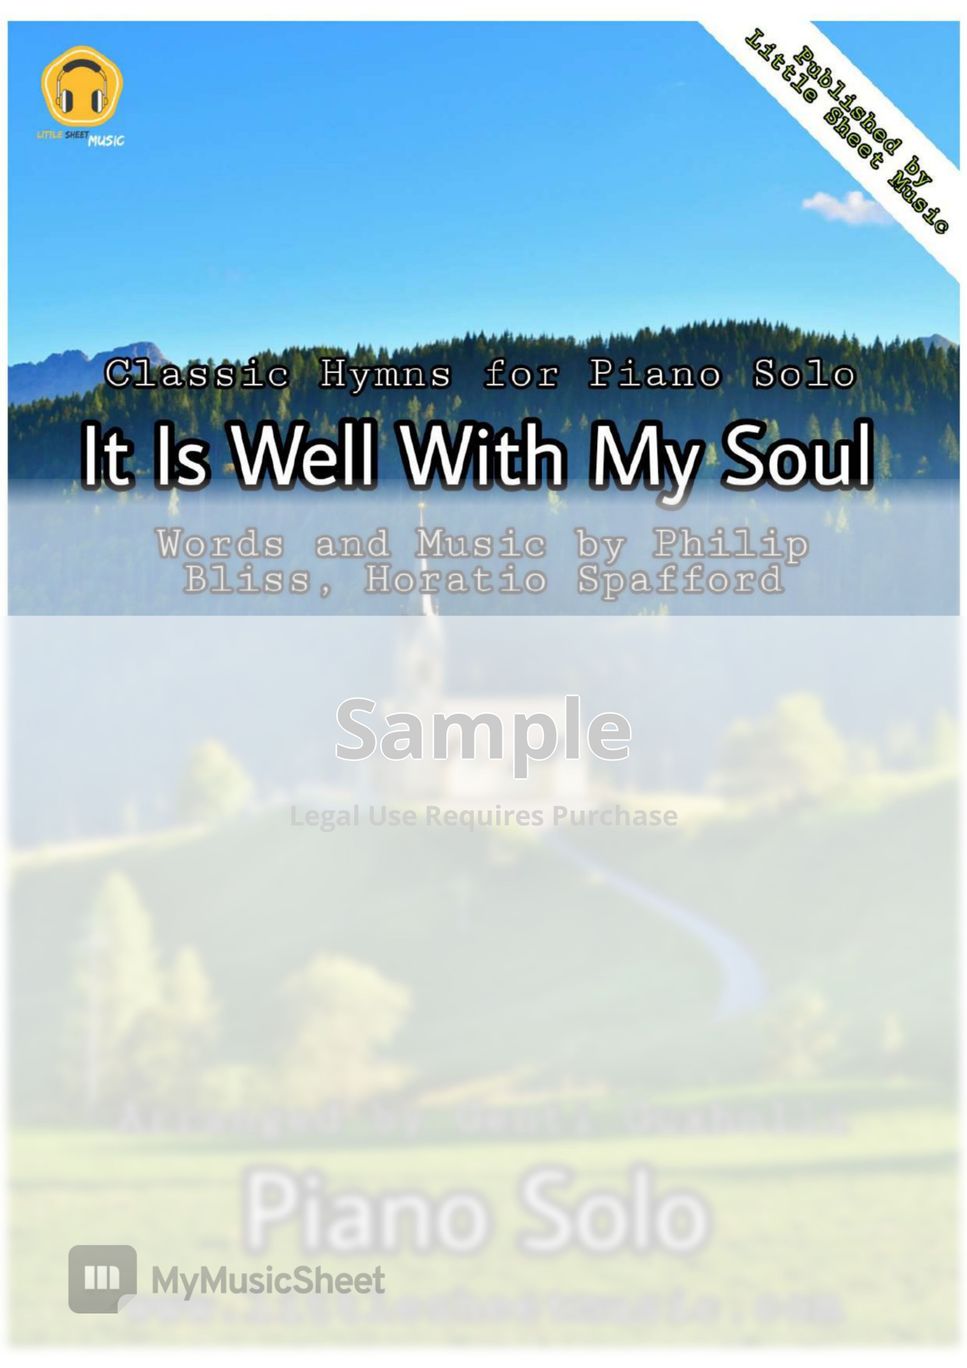 Philip Bliss - It Is Well With My Soul by Genti Guxholli